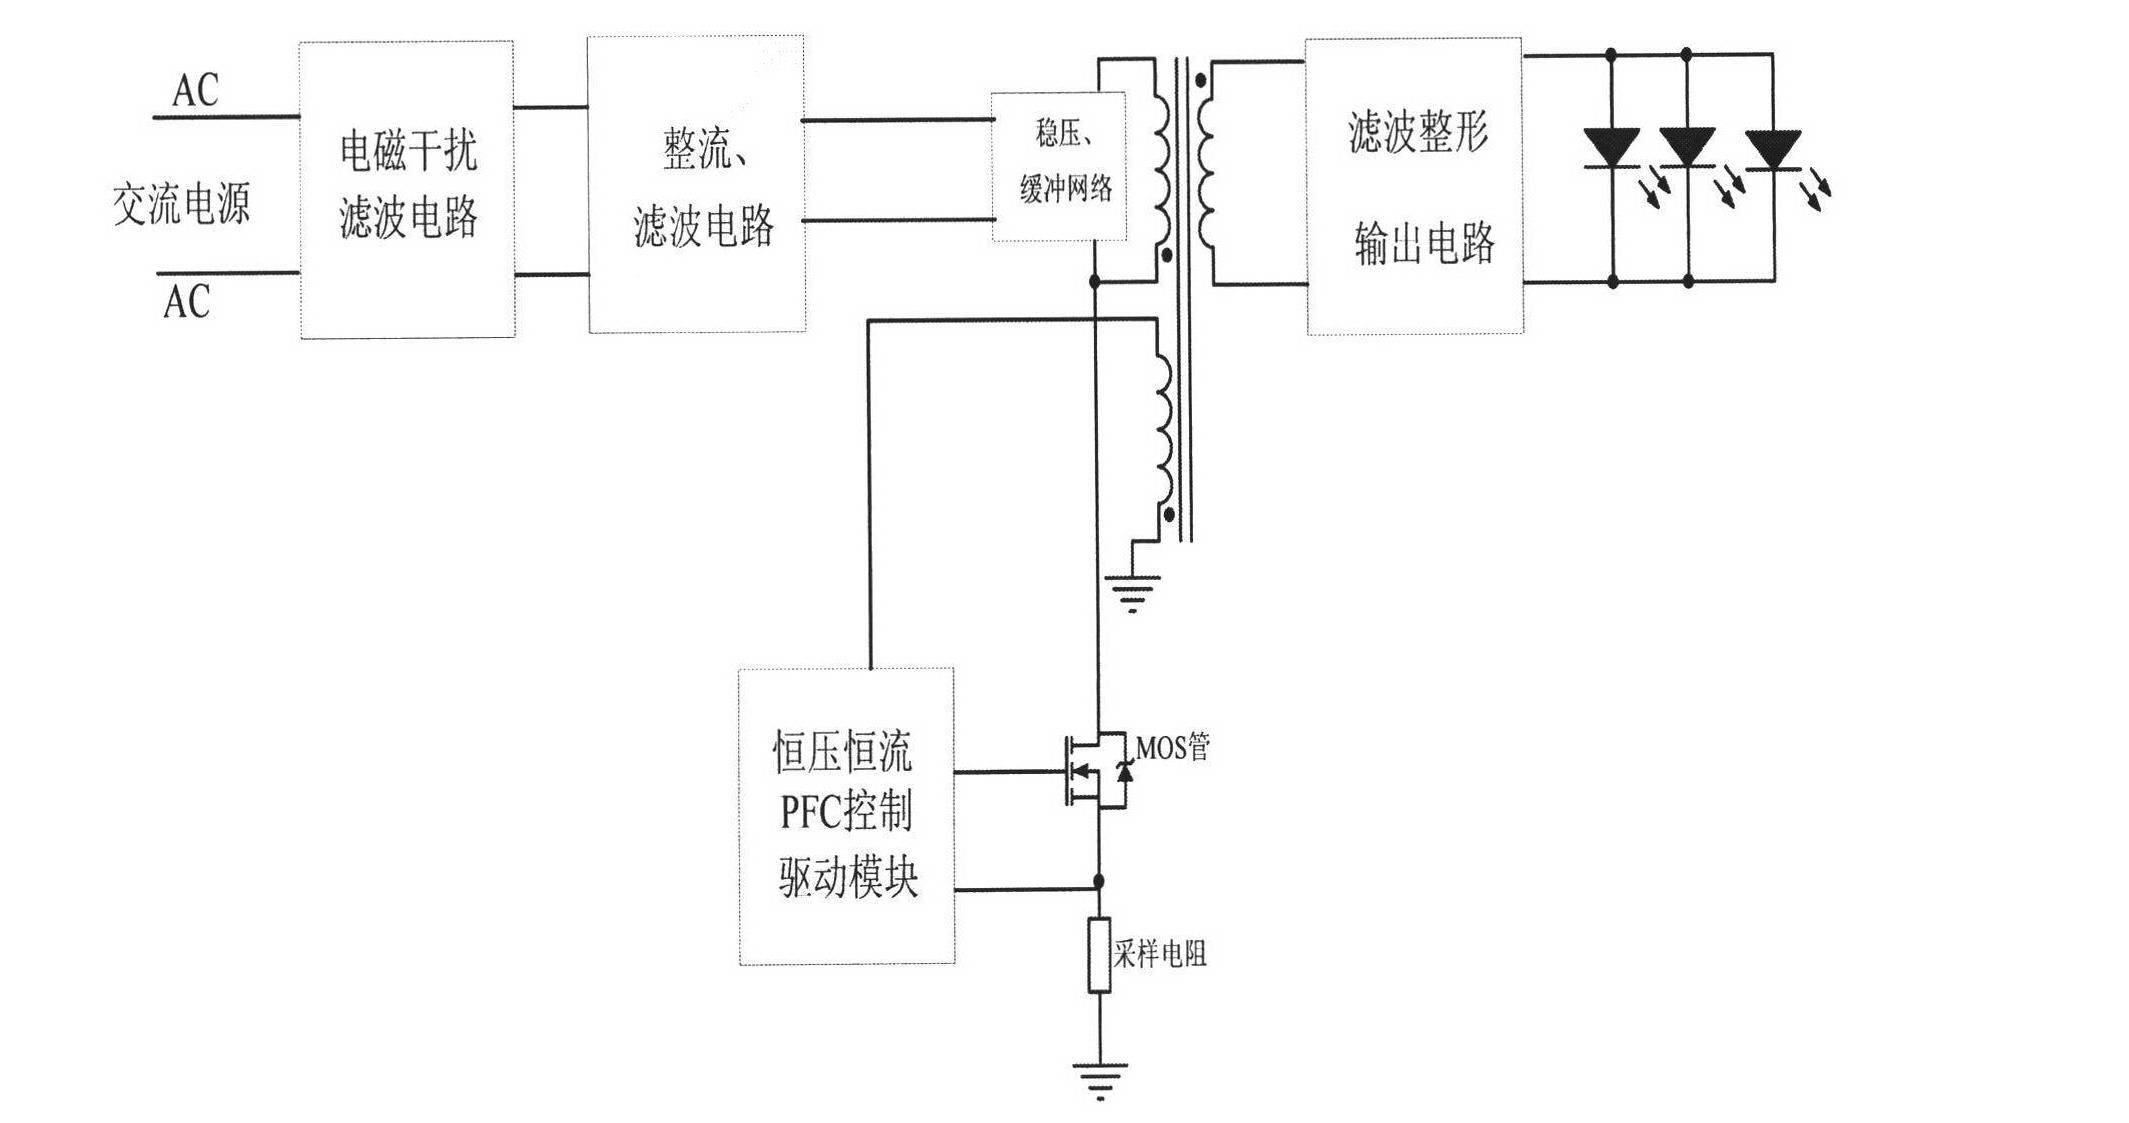 Primary edge control type switch power supply with high-precision constant-voltage/constant-current output and high-pulse-frequency (PF) value